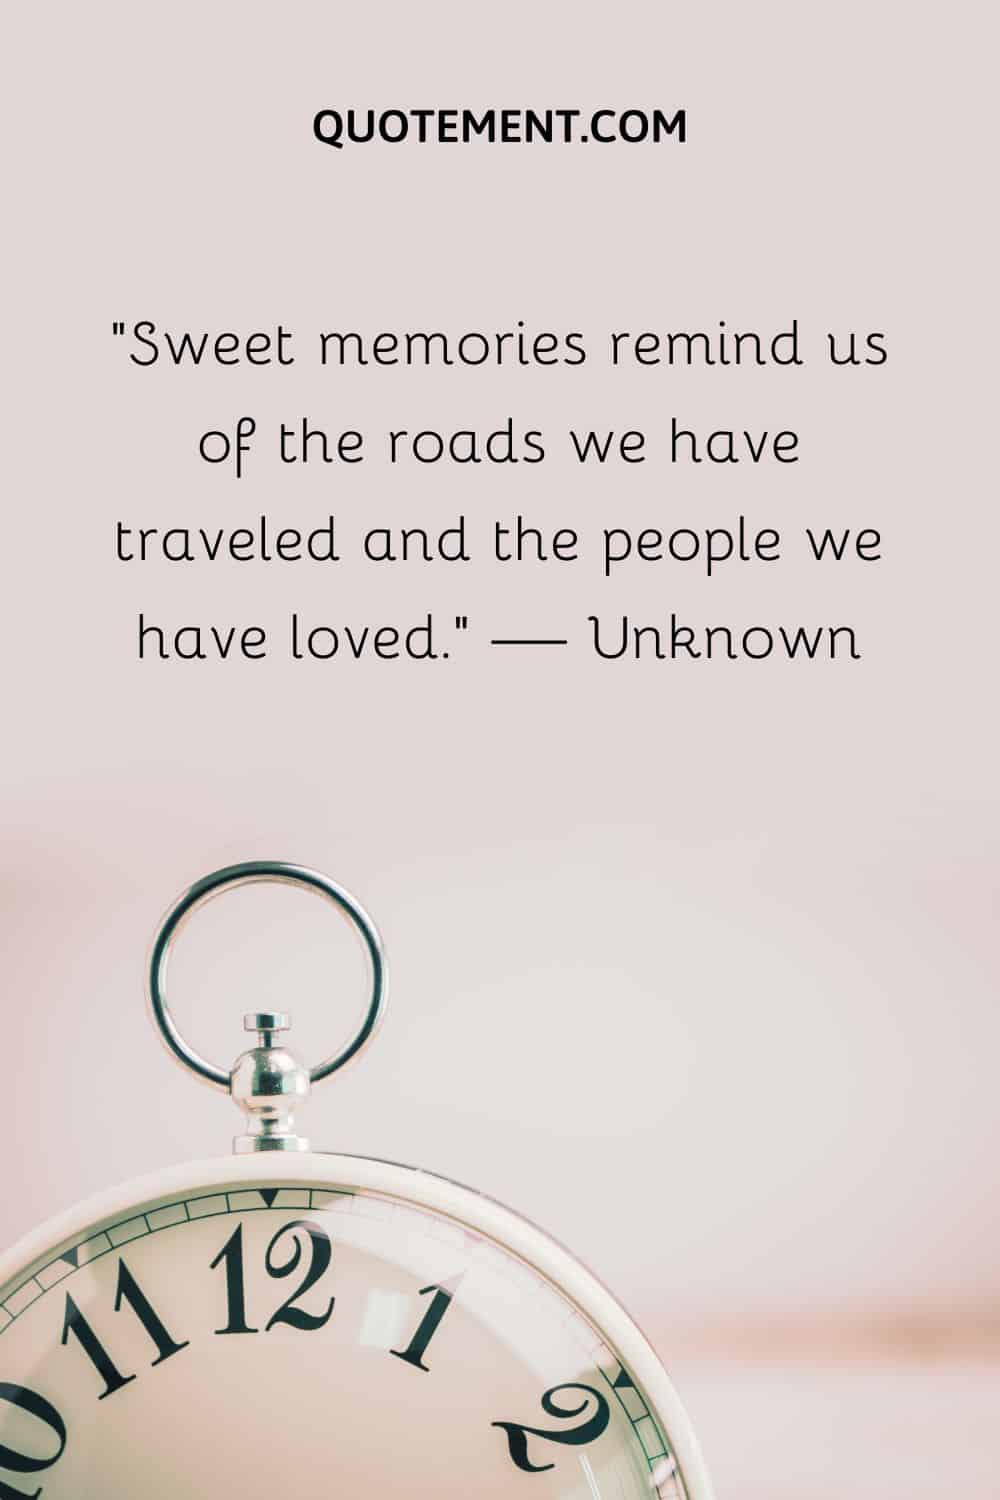 Sweet memories remind us of the roads we have traveled and the people we have loved